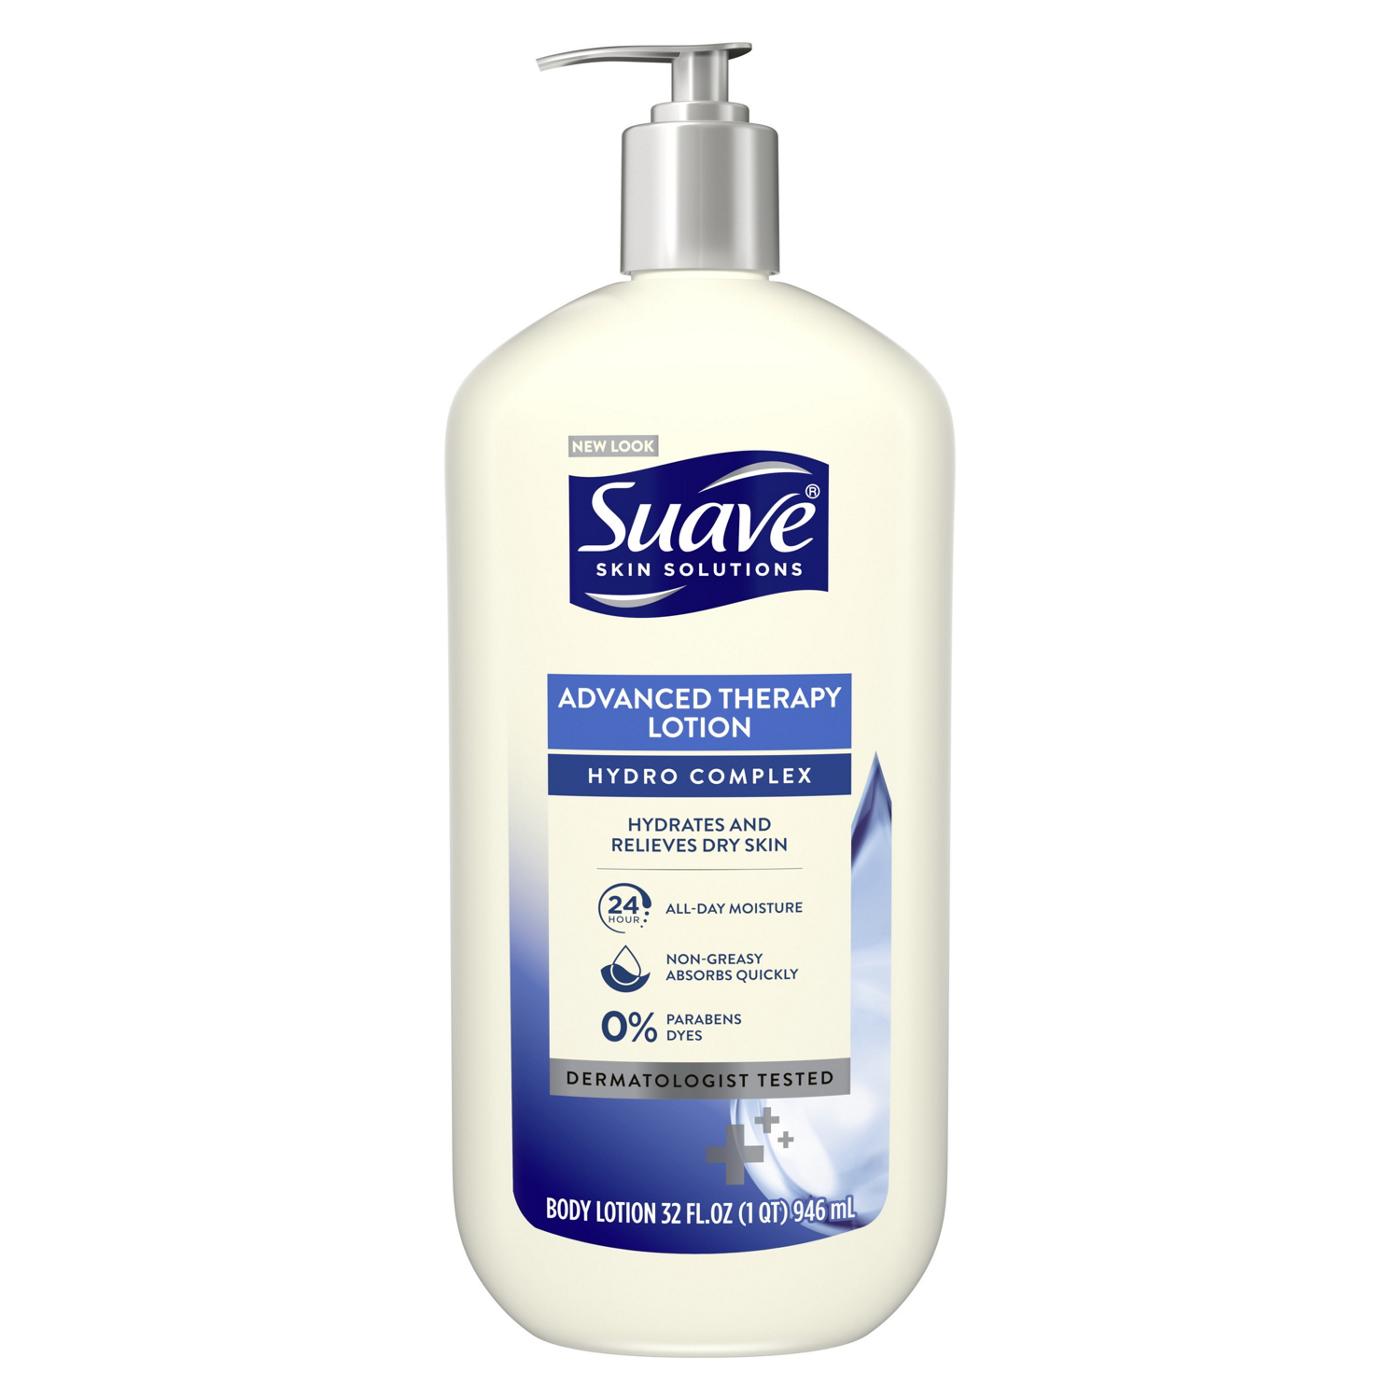 Suave Skin Solutions Advanced Therapy Body Lotion; image 1 of 2